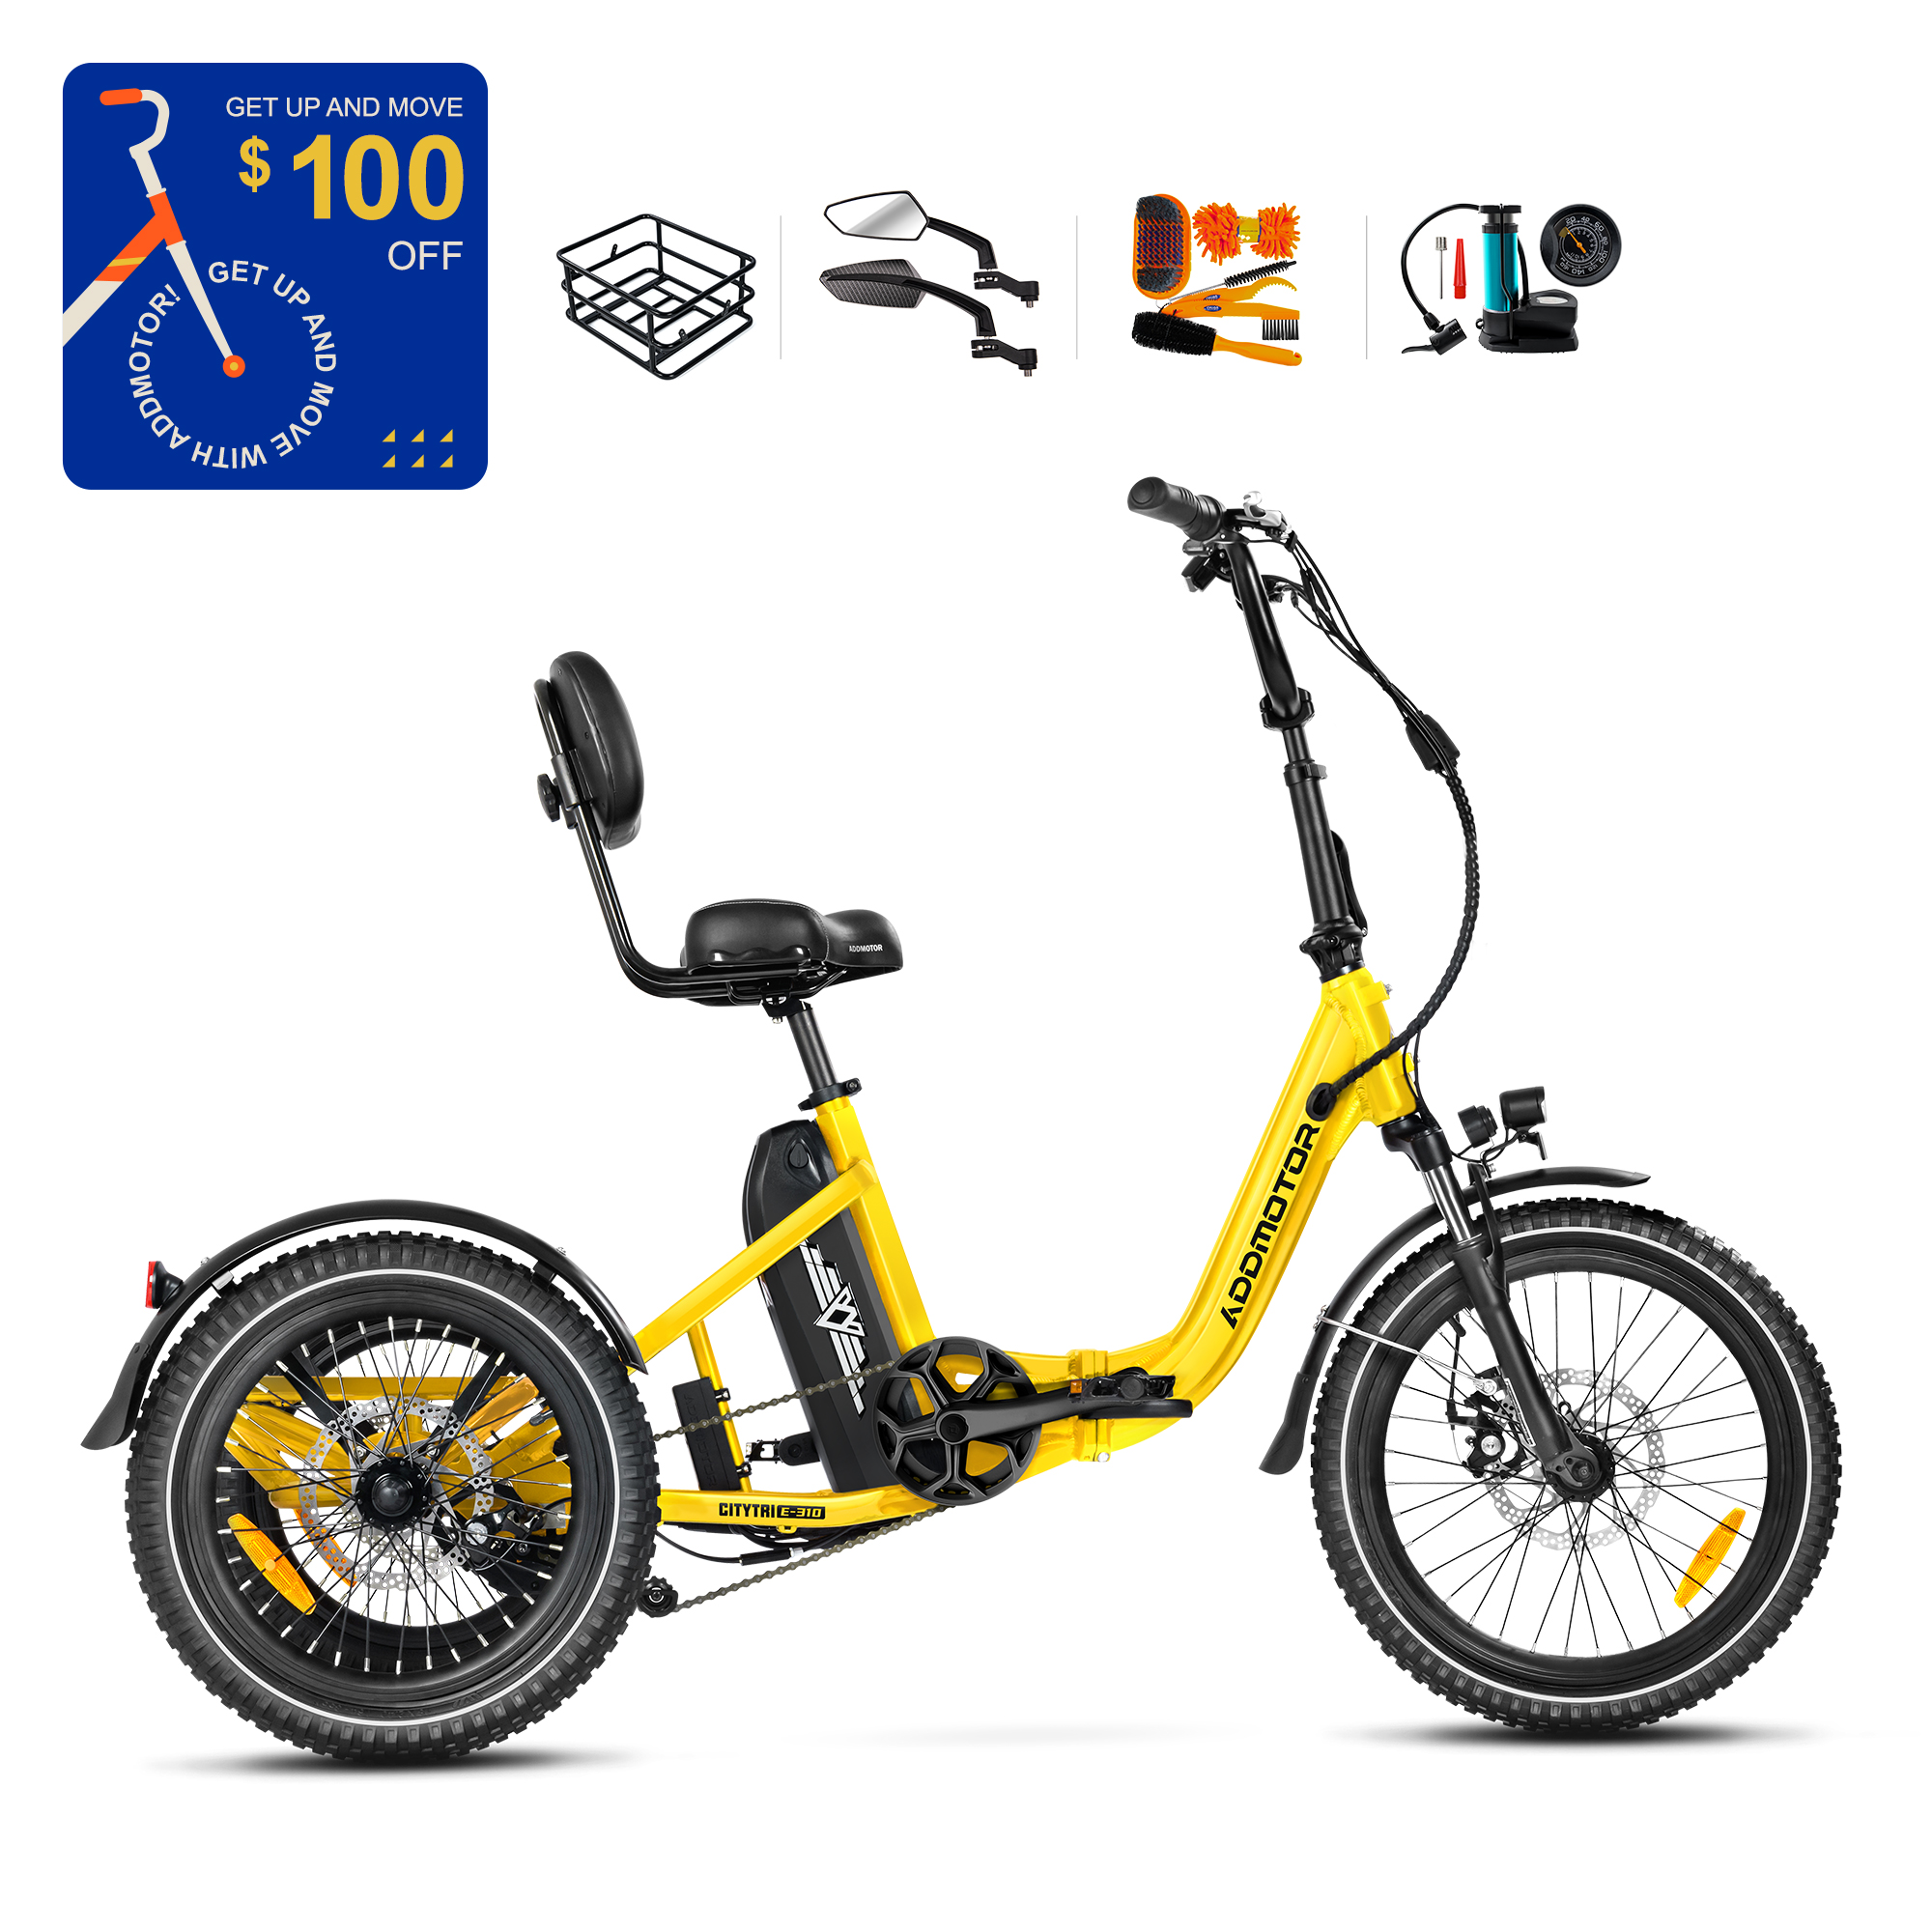 CITYTRI E-310 PLUS Electric Trike with 4 gifts